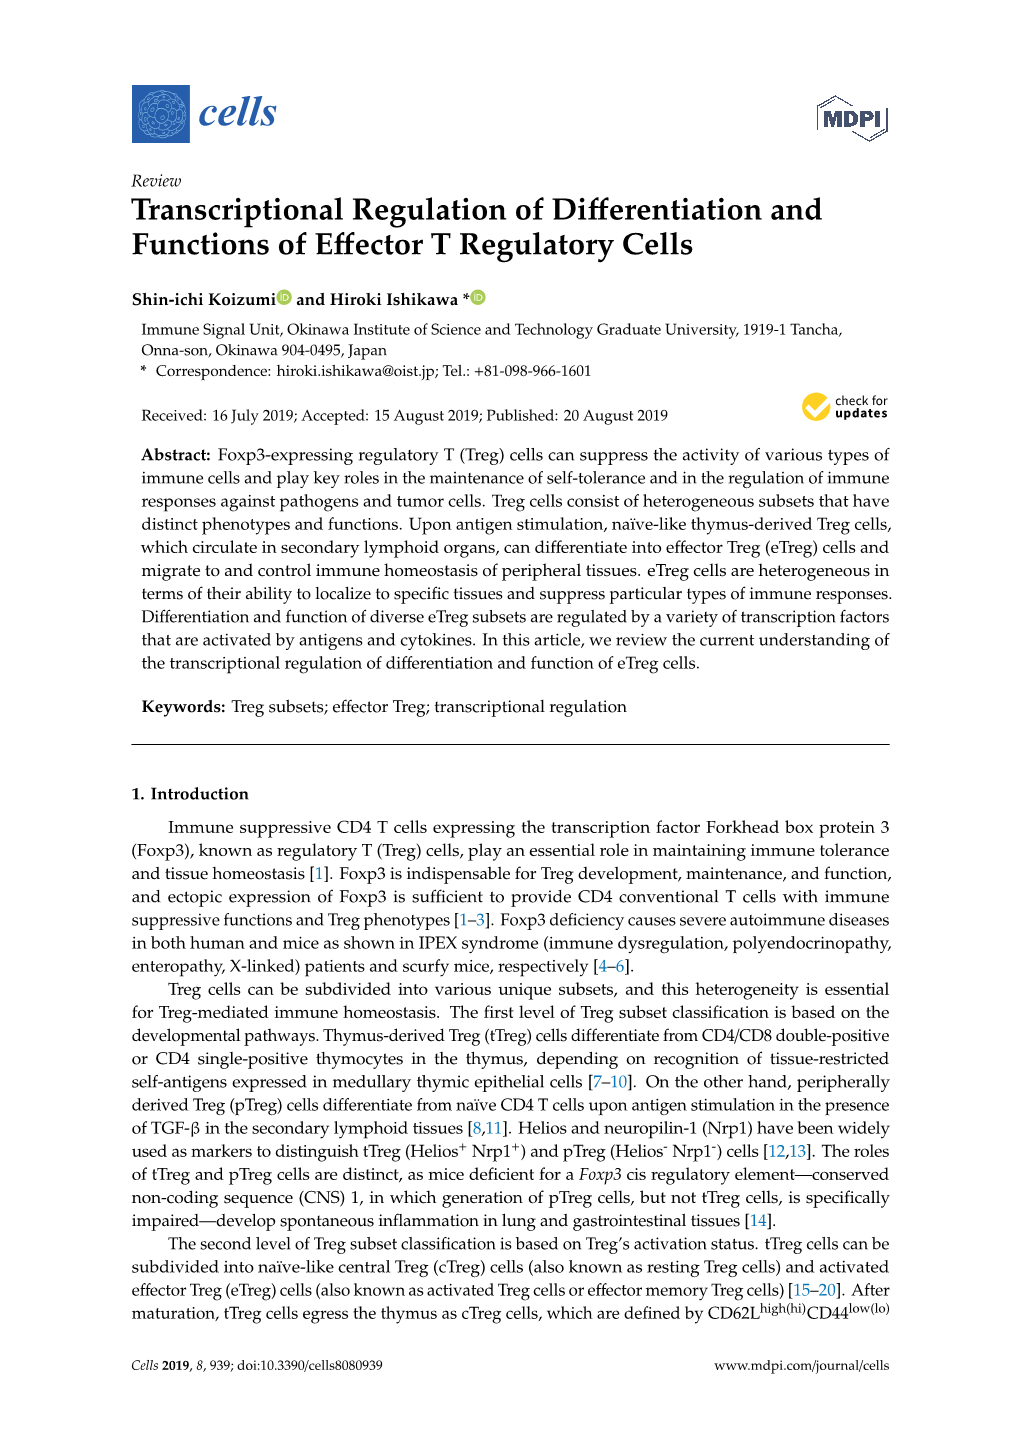 Transcriptional Regulation of Differentiation and Functions Of